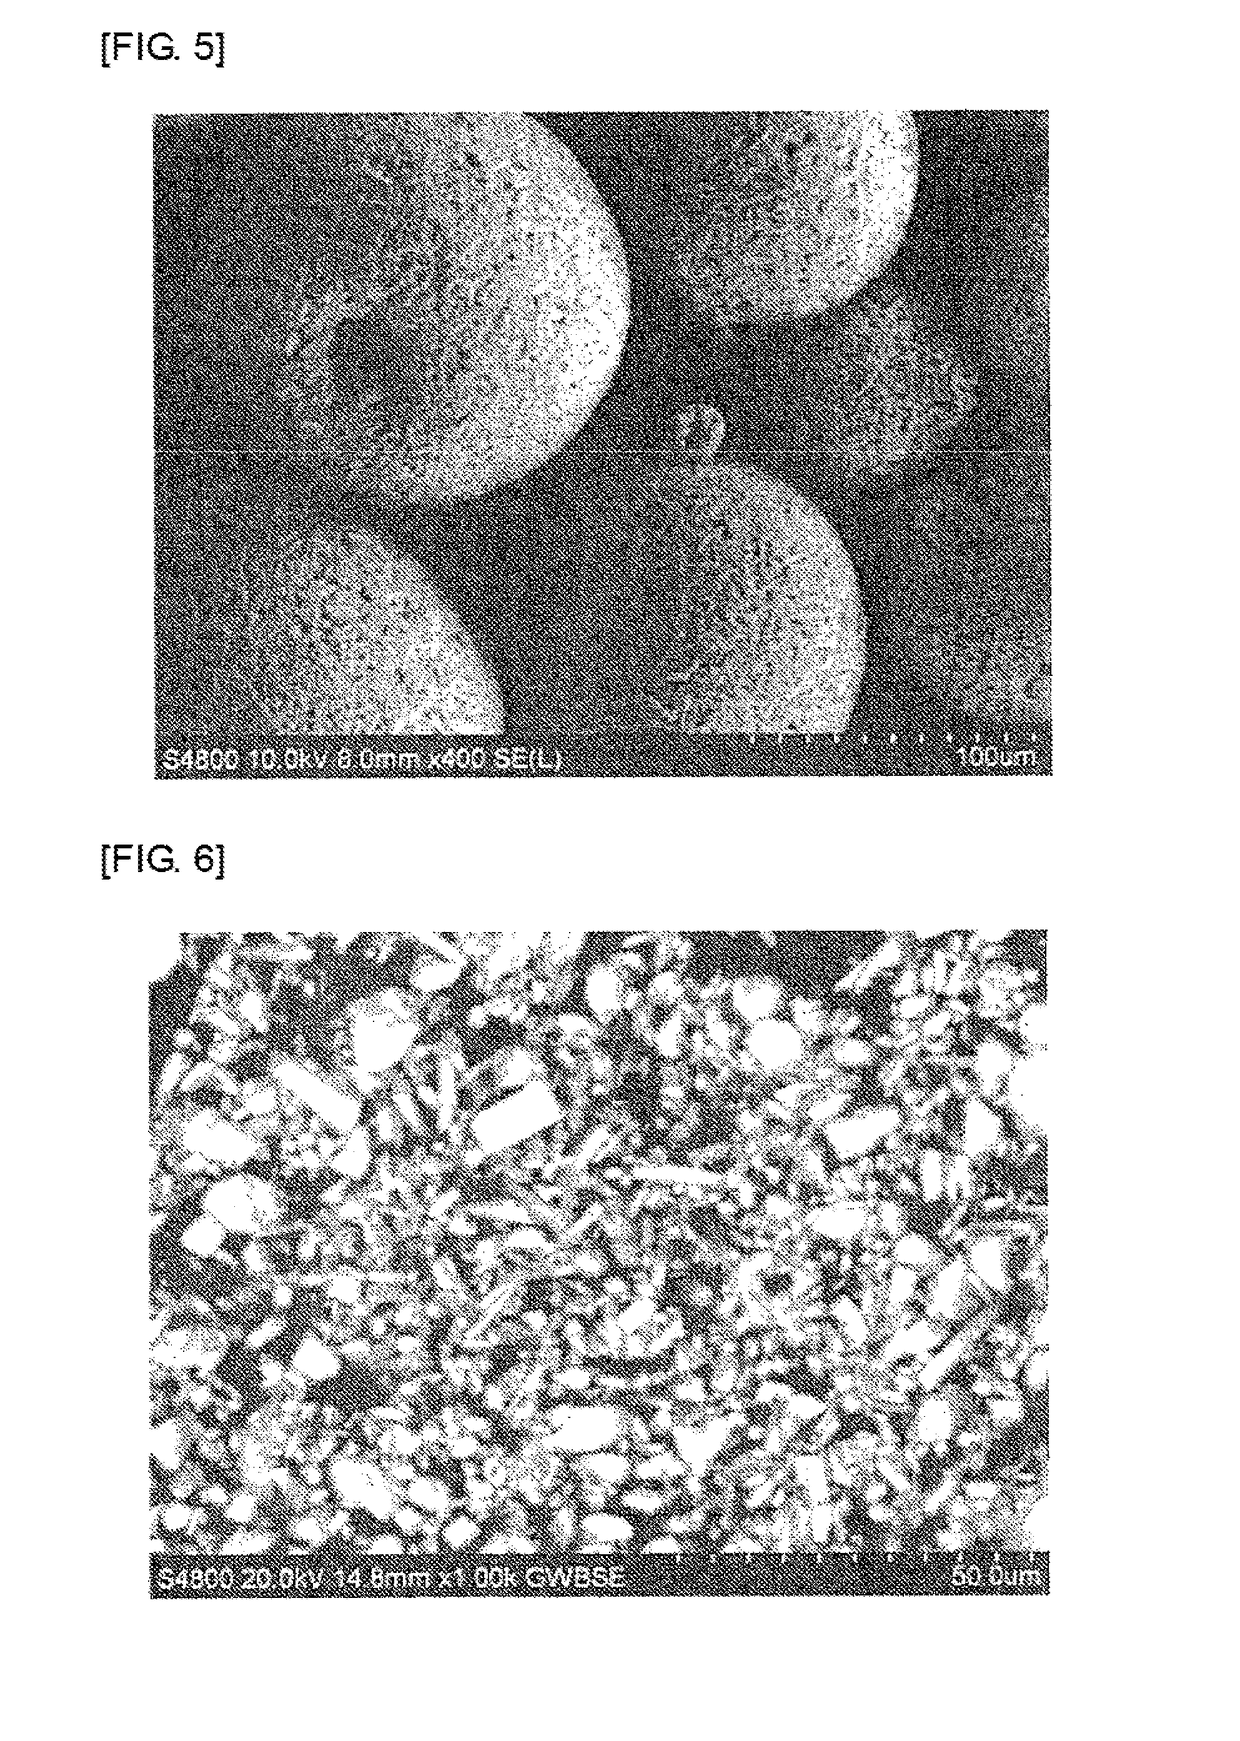 Porous titanate compound particles and method for producing same